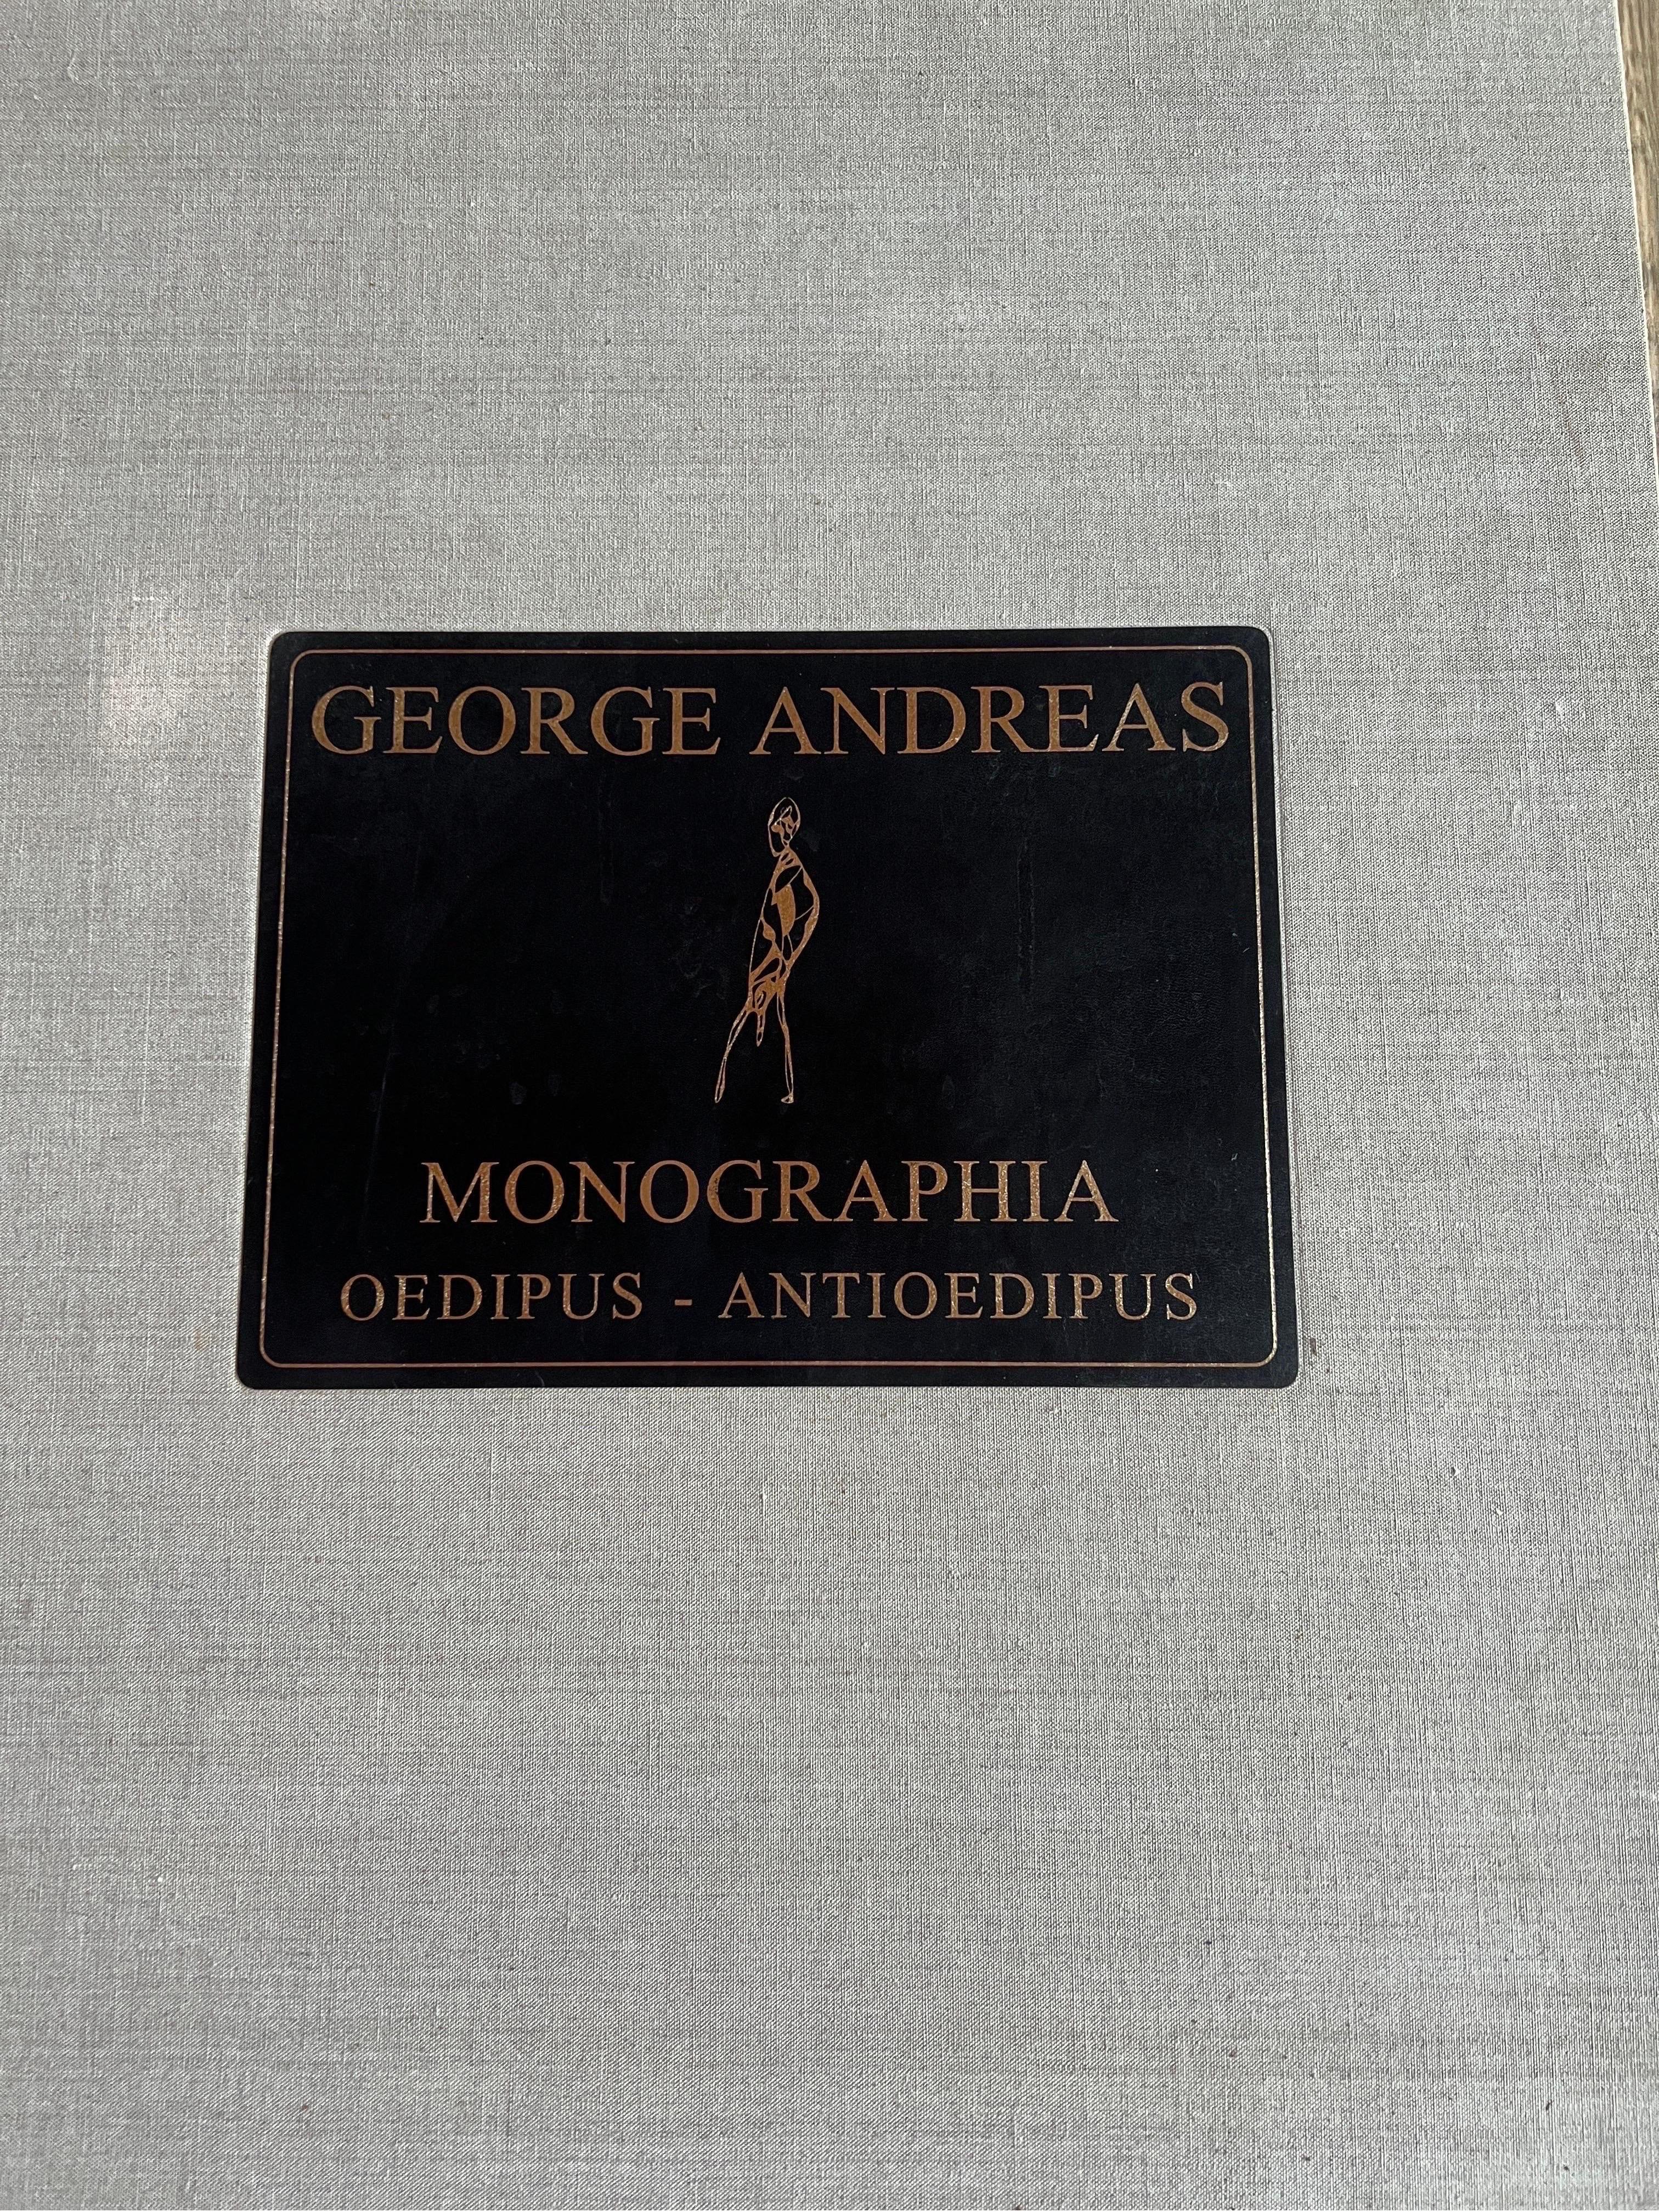 Monographia Oedipus - Antioedipus - Imperialistic Capitalism - Heretical Ochlocracy, Andreas Studio, circa 2004, comprising 18 lithograph reproductions of original oil on canvas paintings, printed in color on unbound archival paper, each